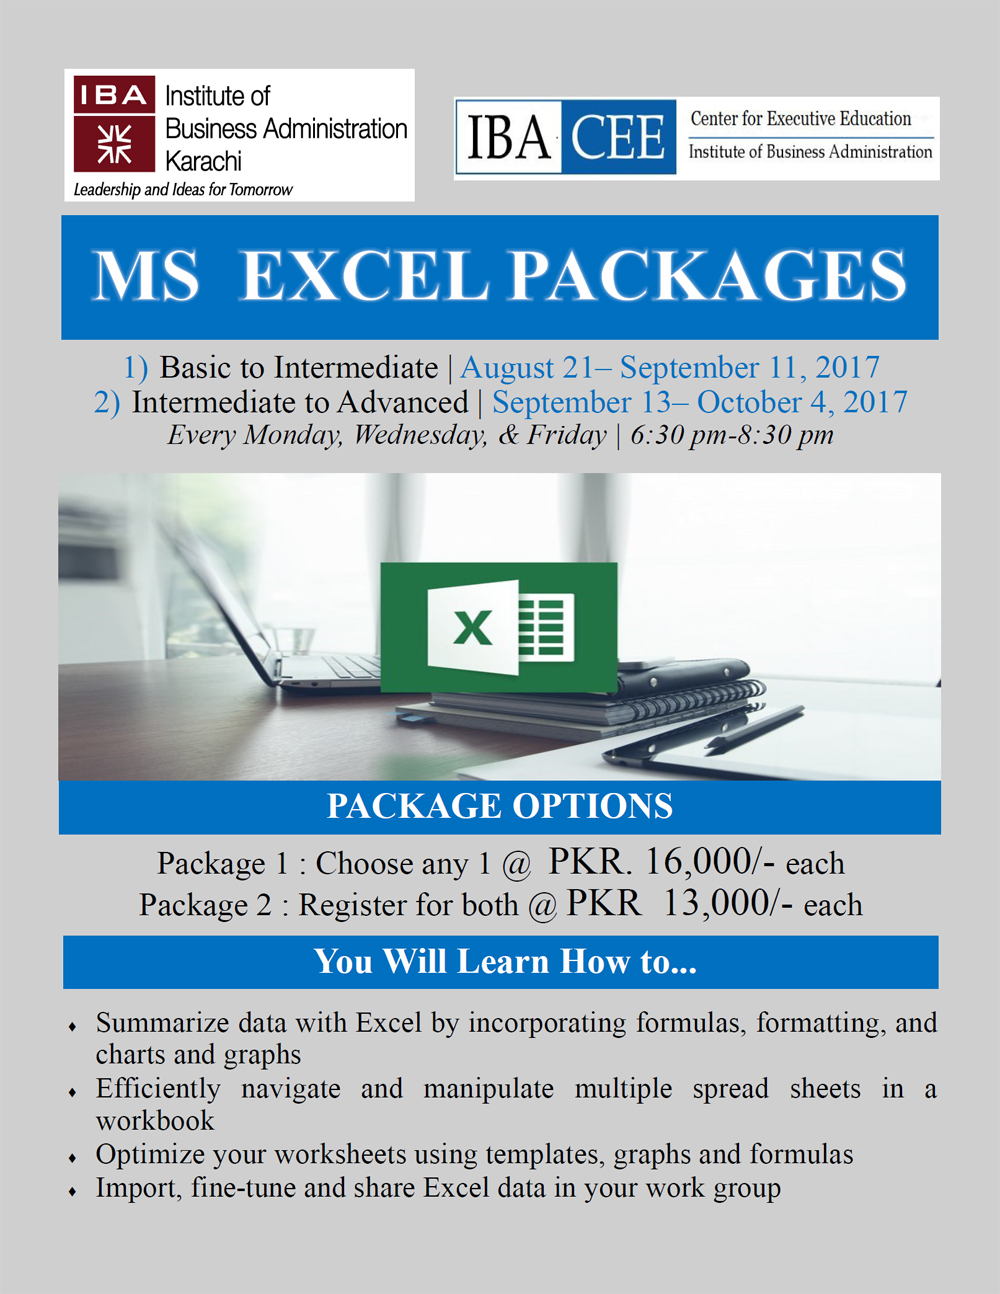 MS Excel Packages